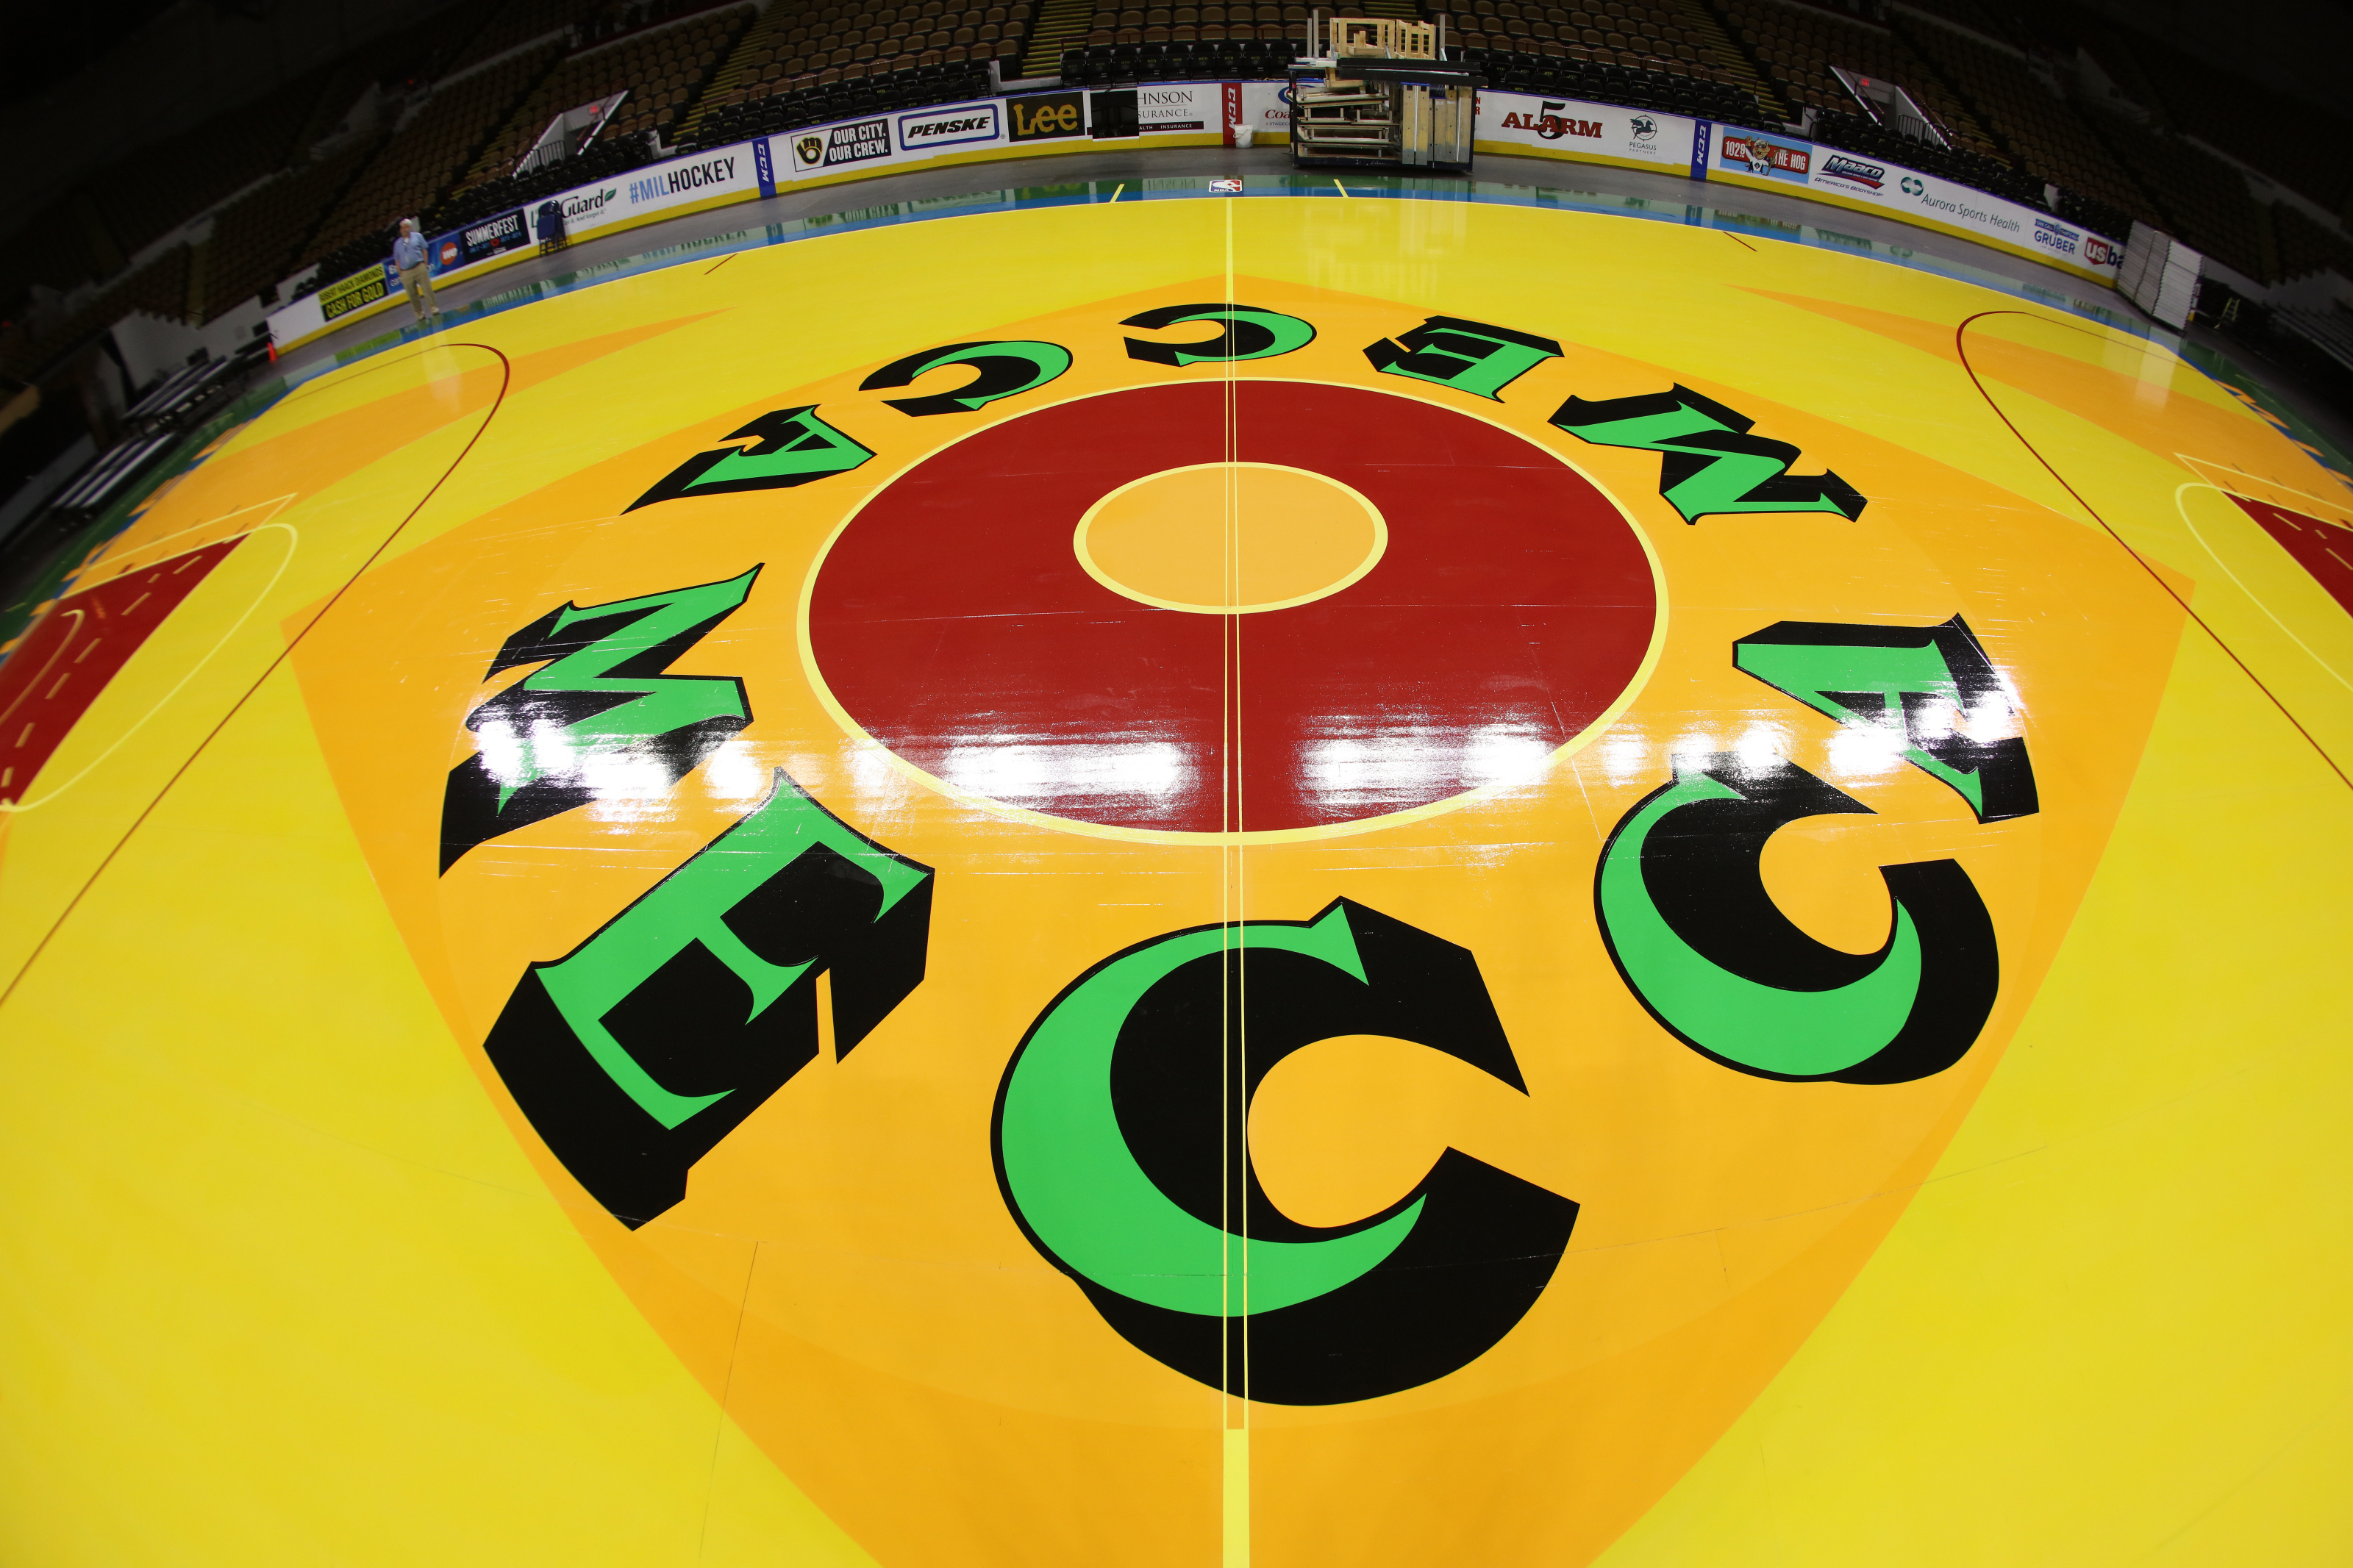 In Photos: Bucks Show Off New City-Inspired Court Photo Gallery